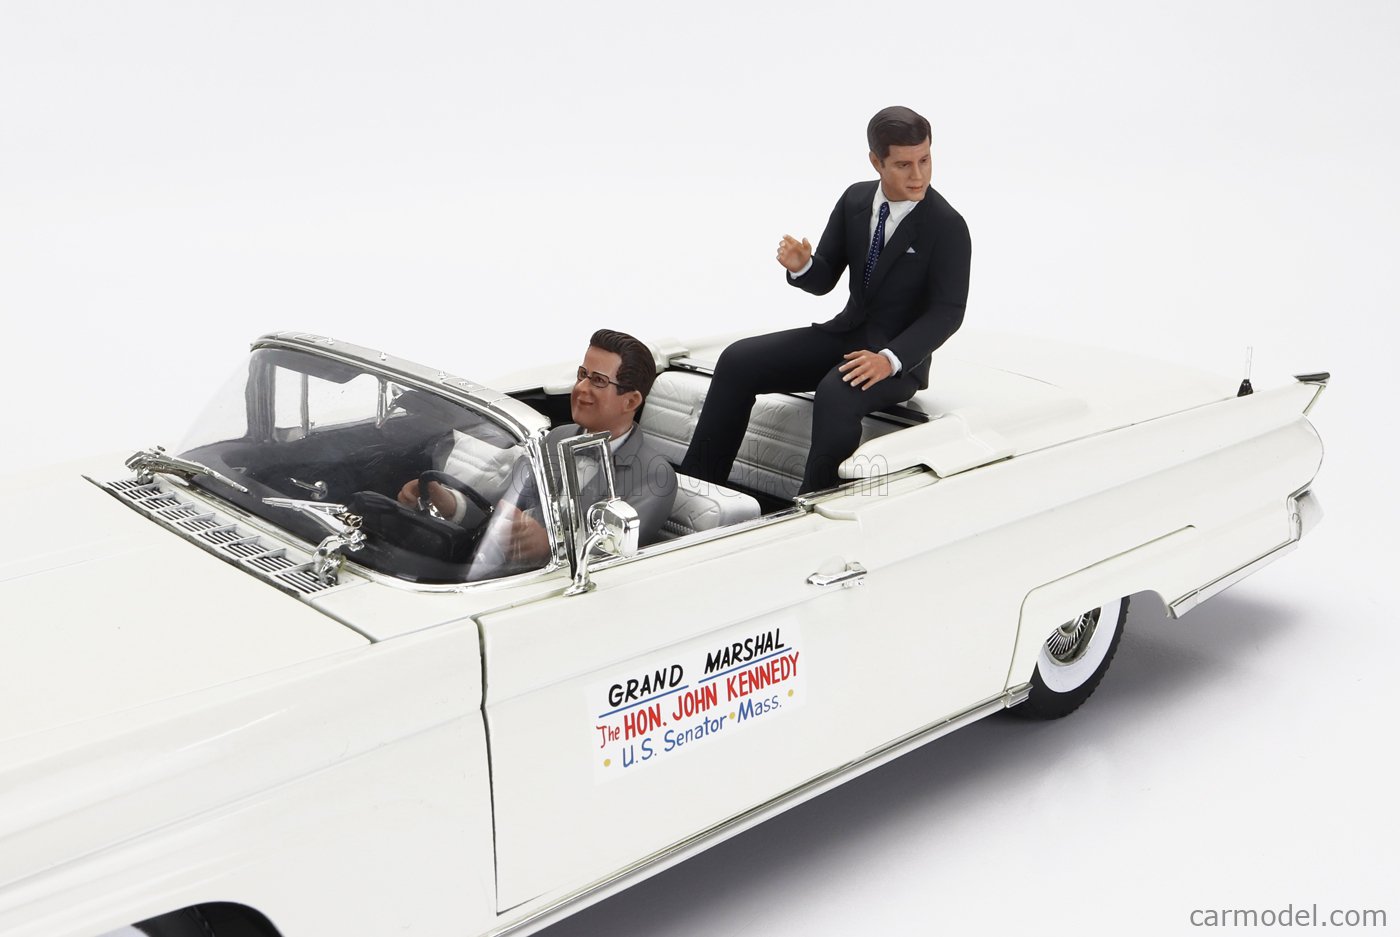 SUN-STAR 04707 Scale 1/18  LINCOLN CONTINENTAL MKIII CABRIOLET OPEN WITH JOHN F.KENNEDY FIGURE IN OREGON 1960 WHITE